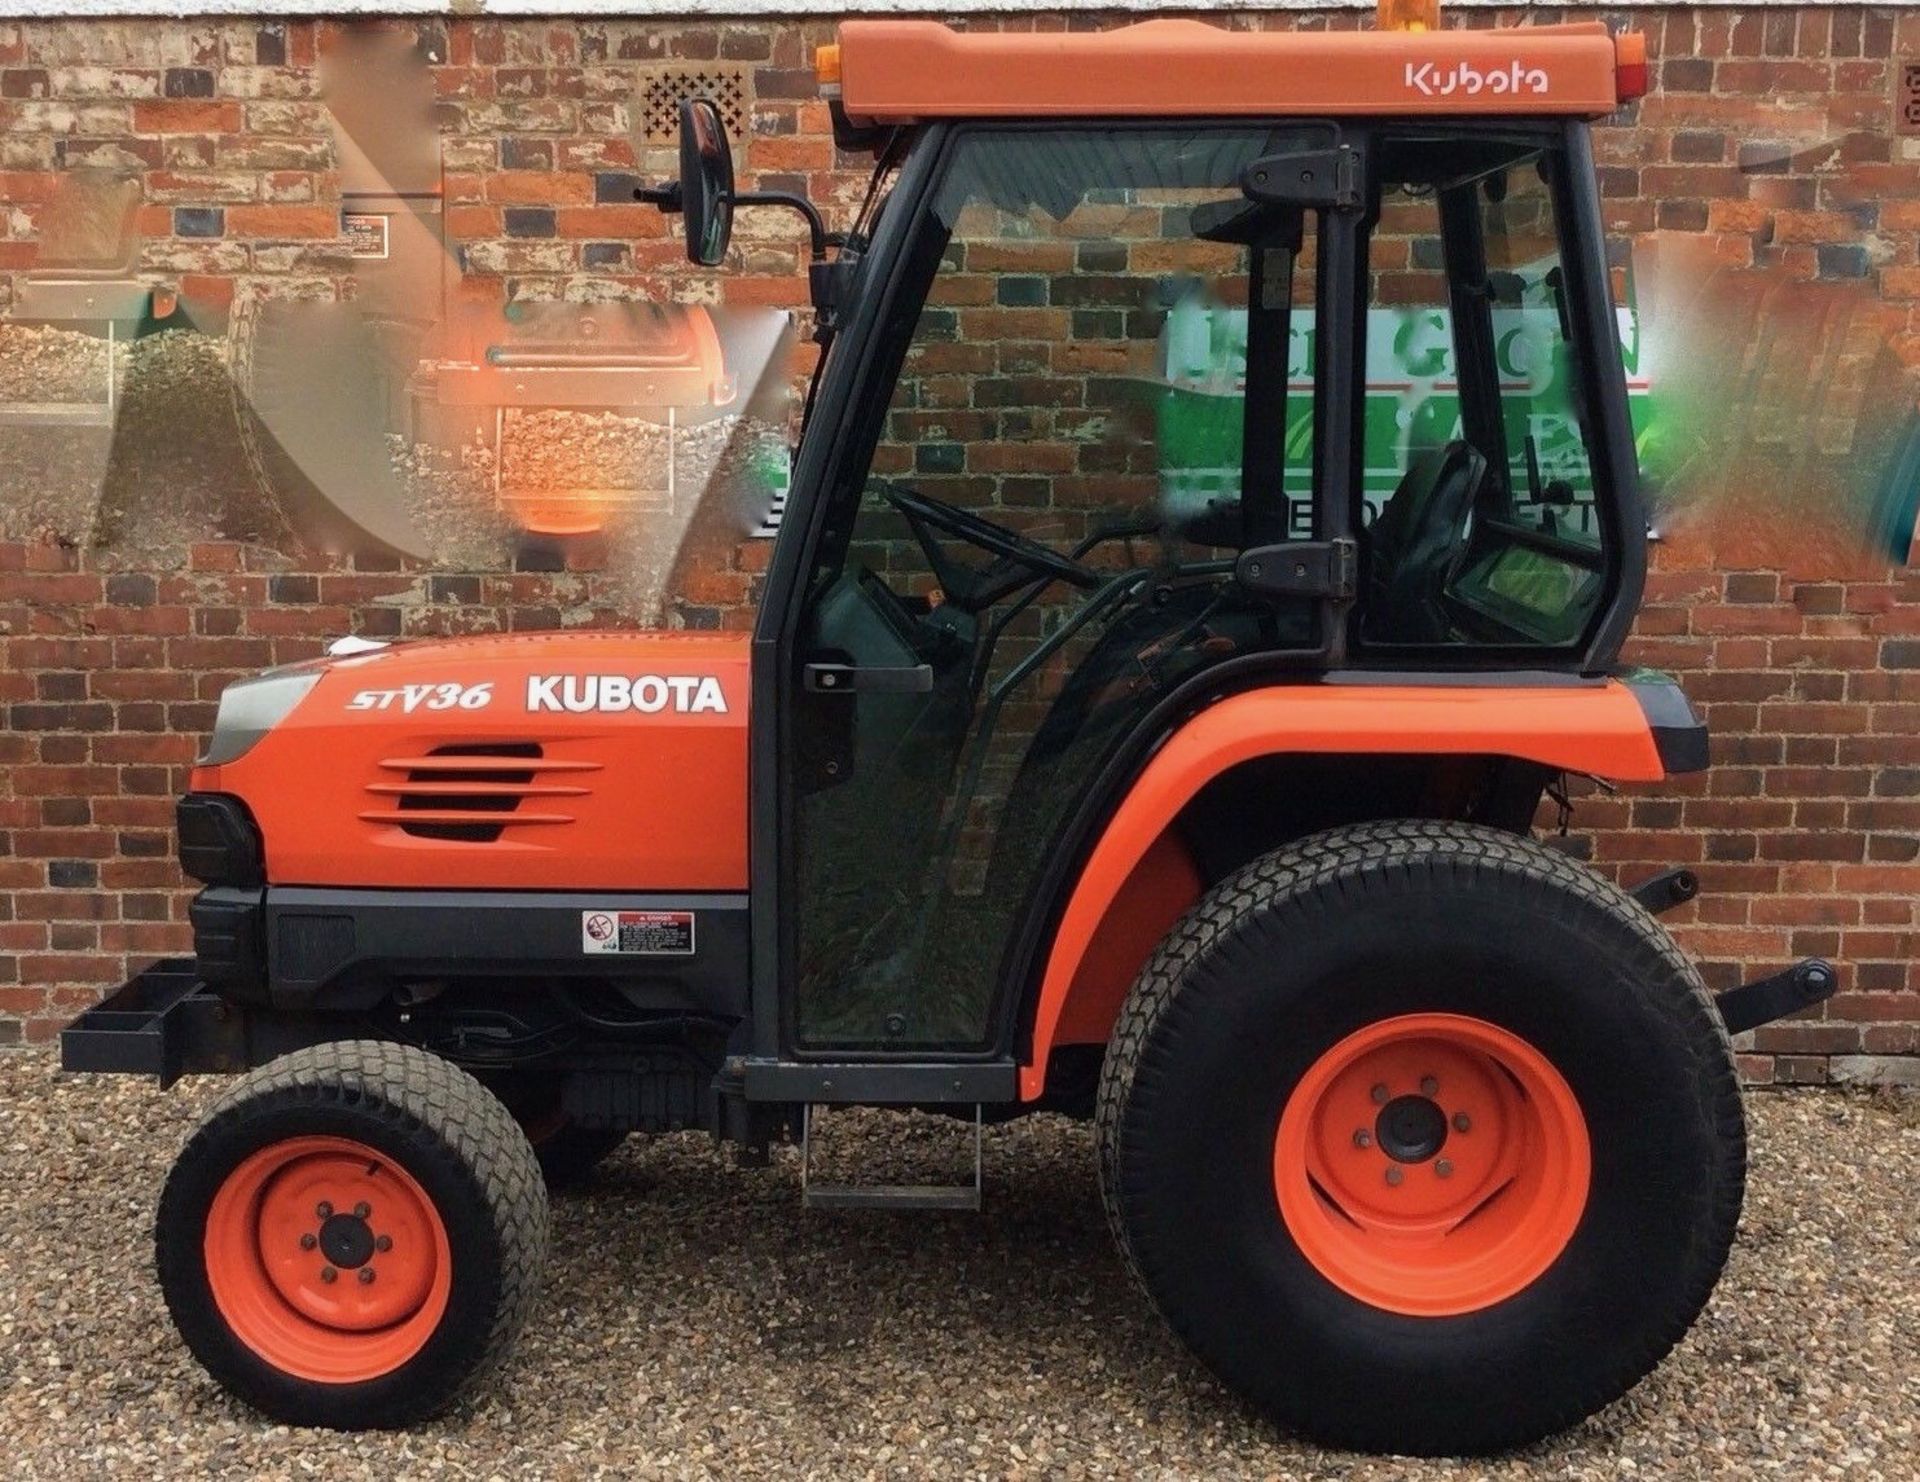 Kubota STV 36 Compact Tractor 4x4 36 Hp Hydrostatic loader Grass tyres - Image 2 of 11